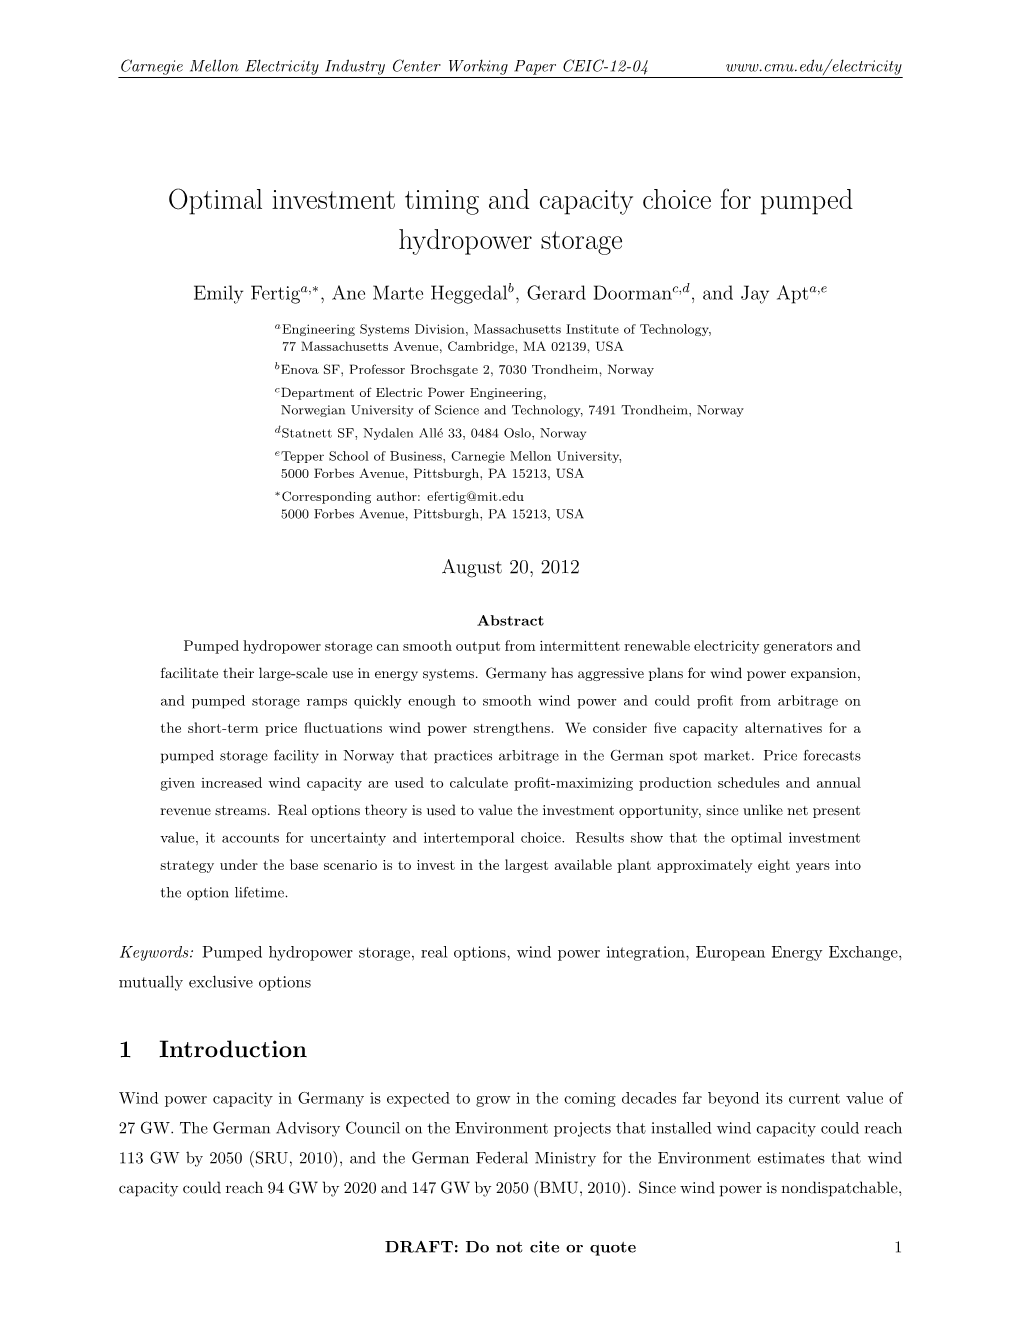 Optimal Investment Timing and Capacity Choice for Pumped Hydropower Storage